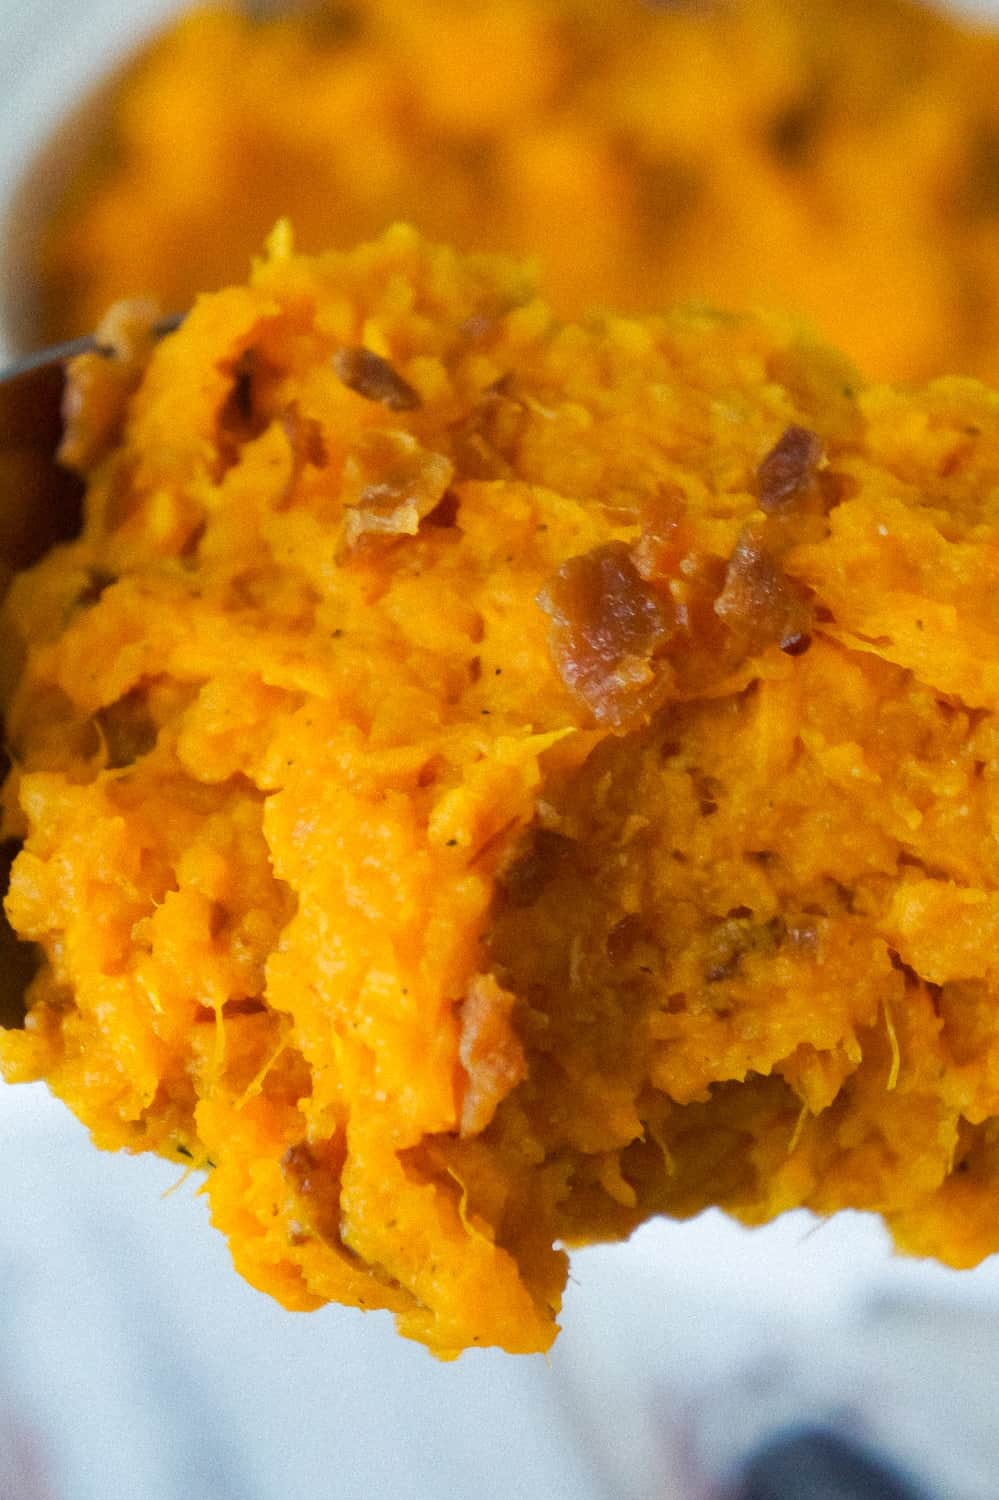 Maple Bacon Mashed Sweet Potatoes are an easy side dish recipe perfect for Thanksgiving. These mashed sweet potatoes are made with maple syrup and real bacon bits.